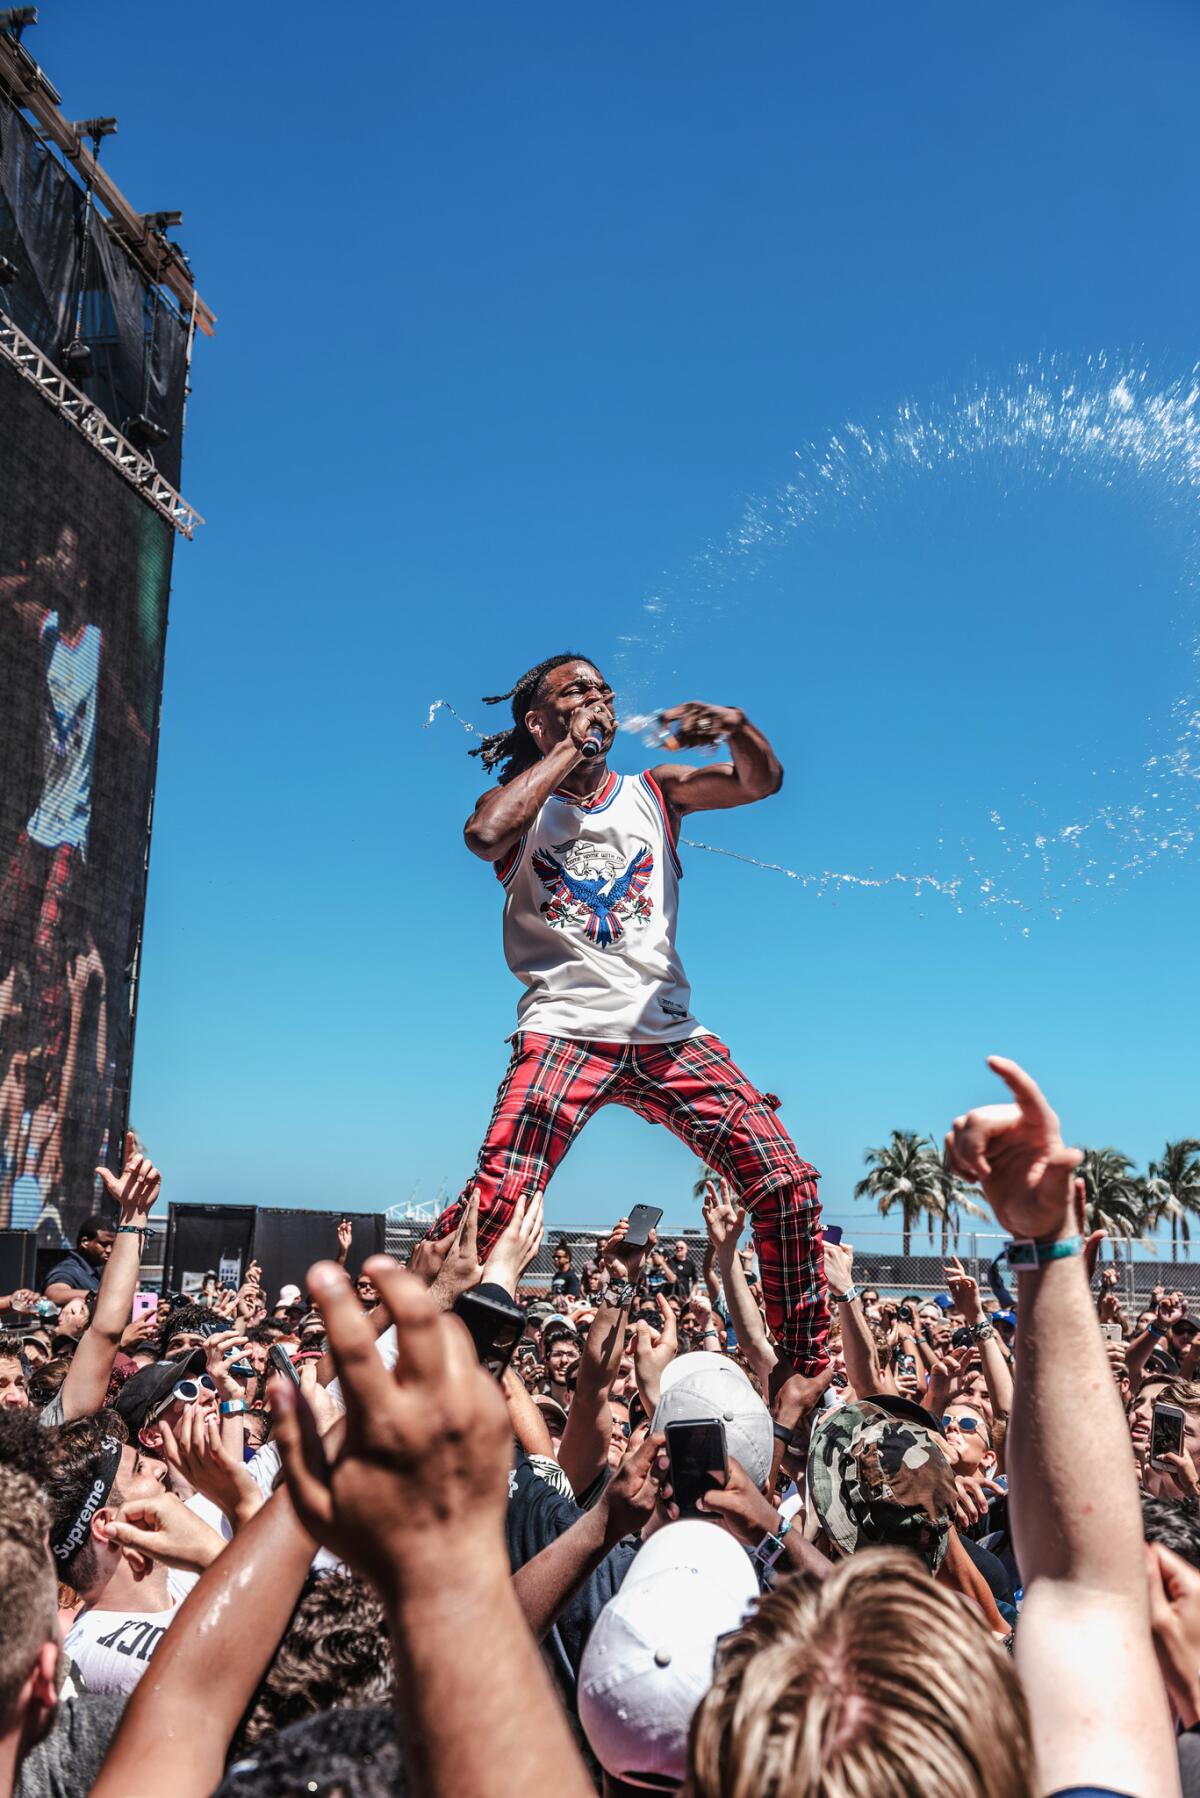 Jazz Cartier in performance at the Miami Rolling Loud festival.